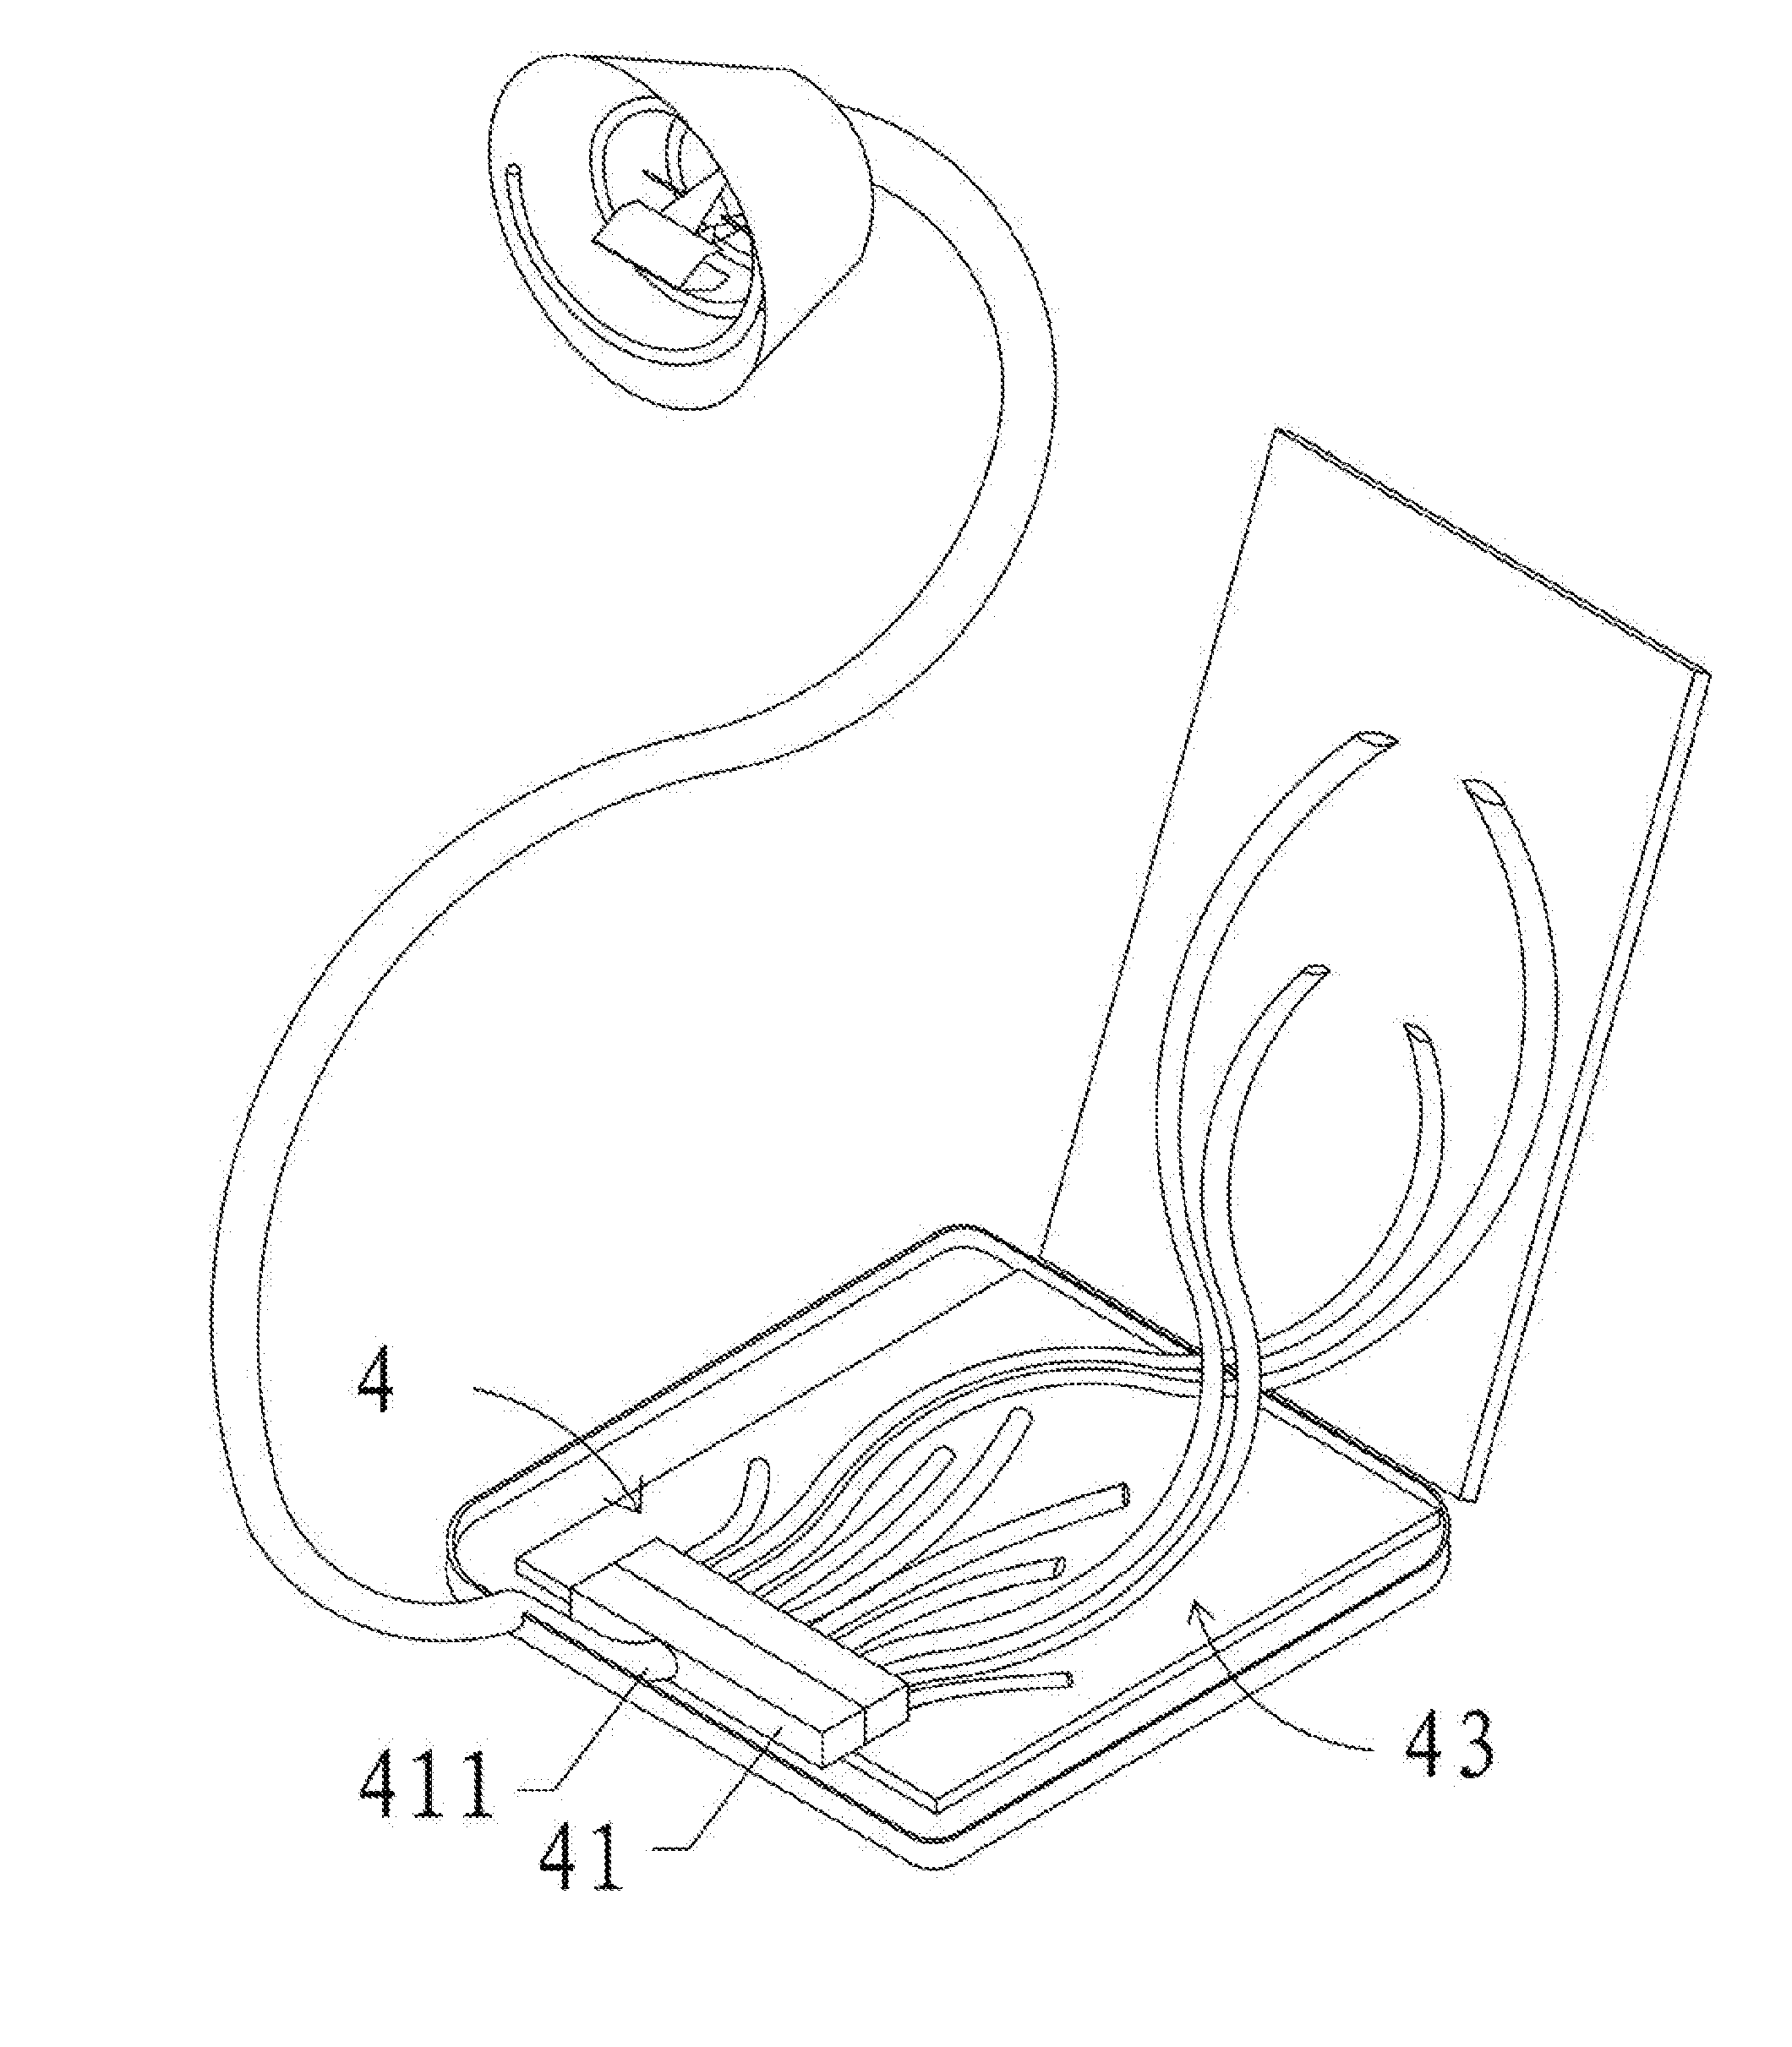 Seat cushion with rapid cooling and heating function